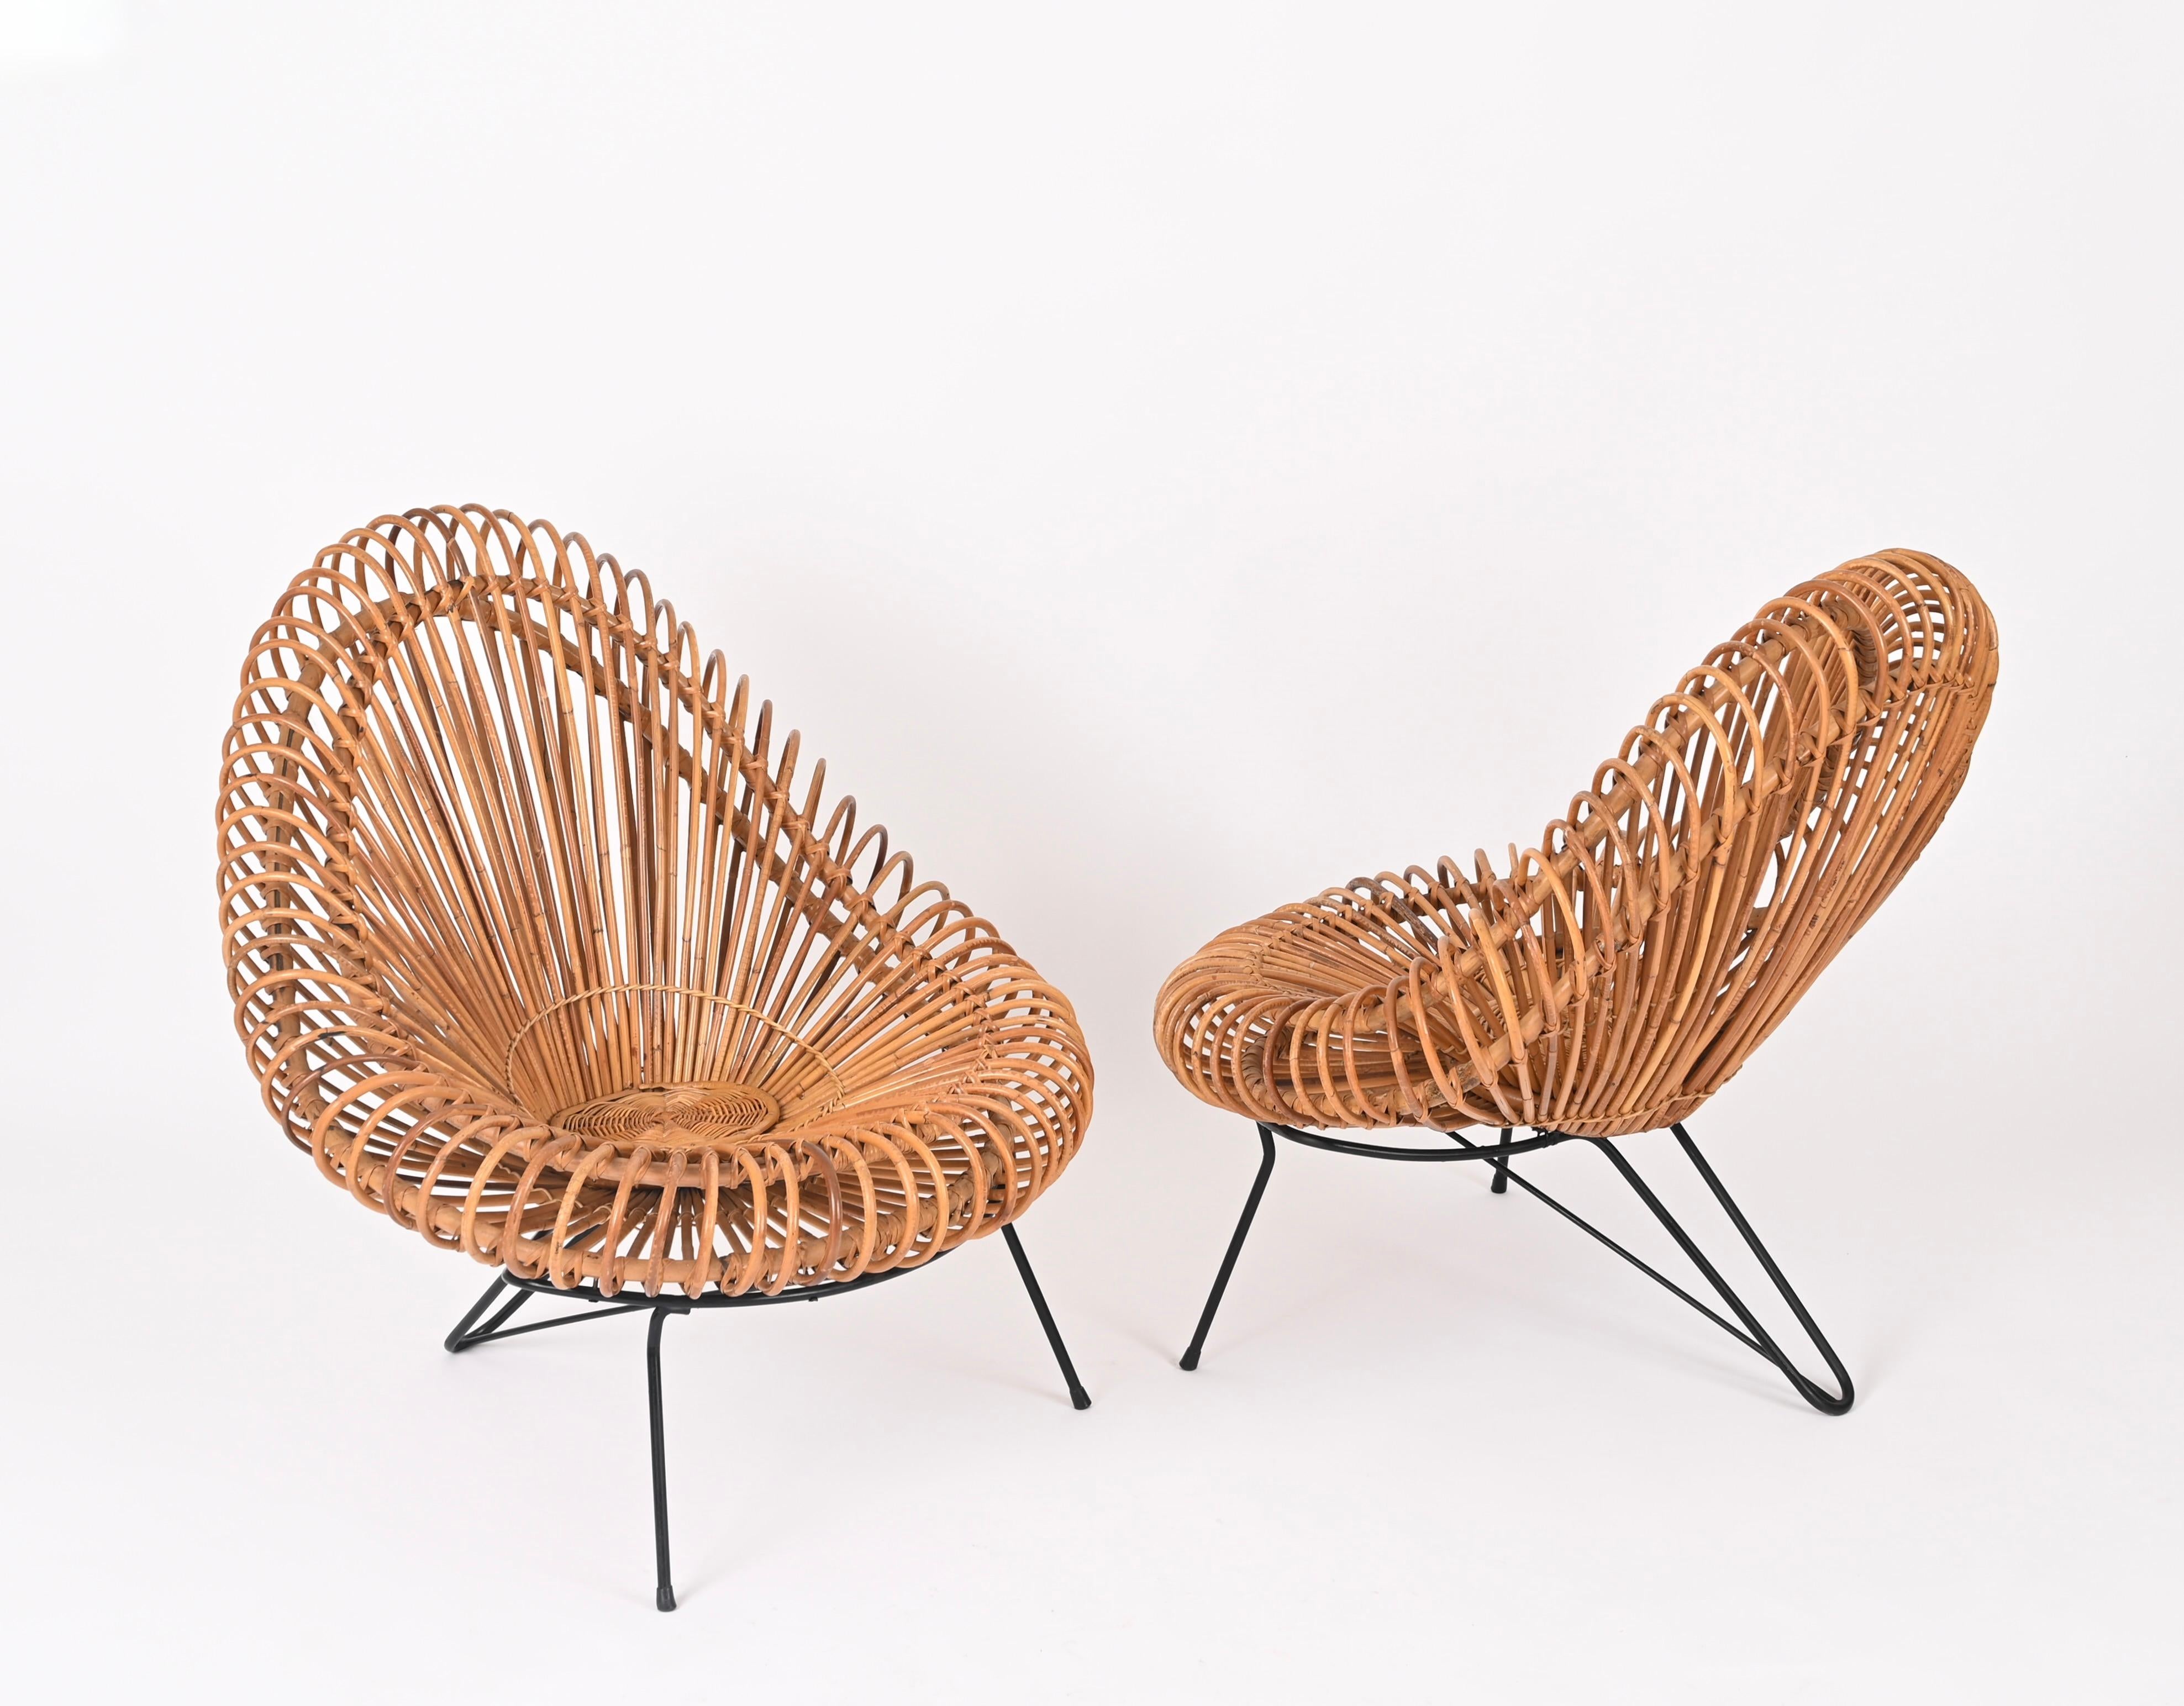 20th Century Living Room Rattan Set by Janine Abraham & Dirk Jan Rol - Chairs, Pouf, Mirror  For Sale